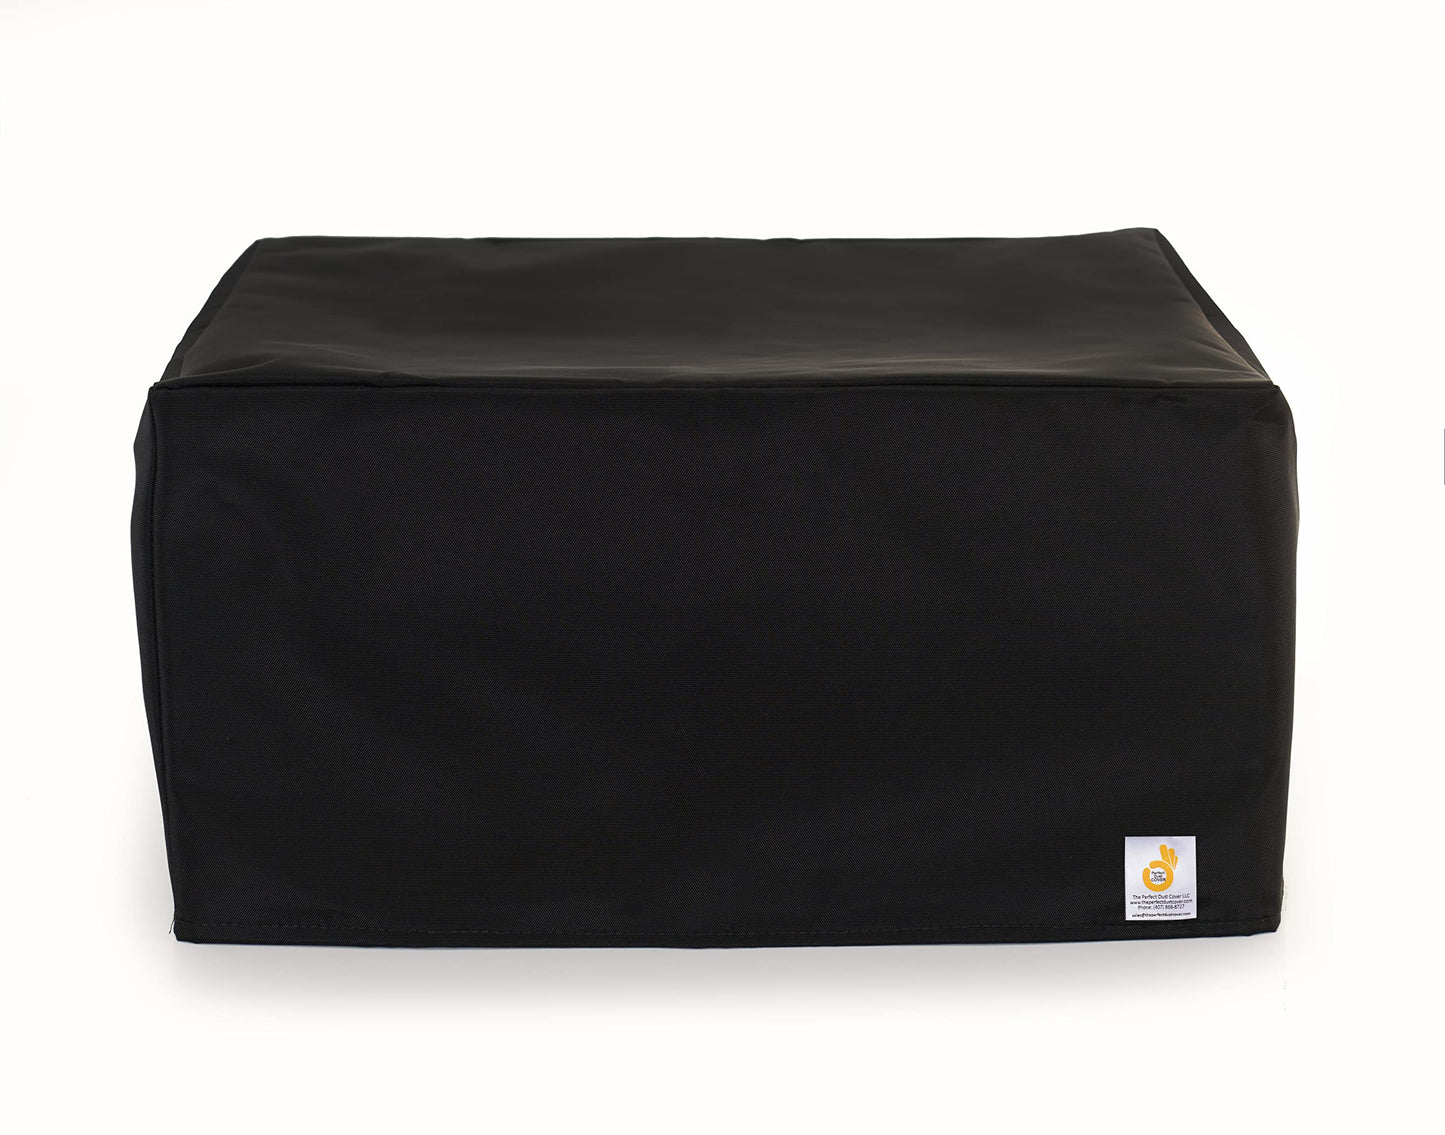 The Perfect Dust Cover, Black Nylon Cover Compatible with Konica Bizhub 4700i Monochrome Printer, Double Stitched and Waterproof Dust Cover by The Perfect Dust Cover LLC